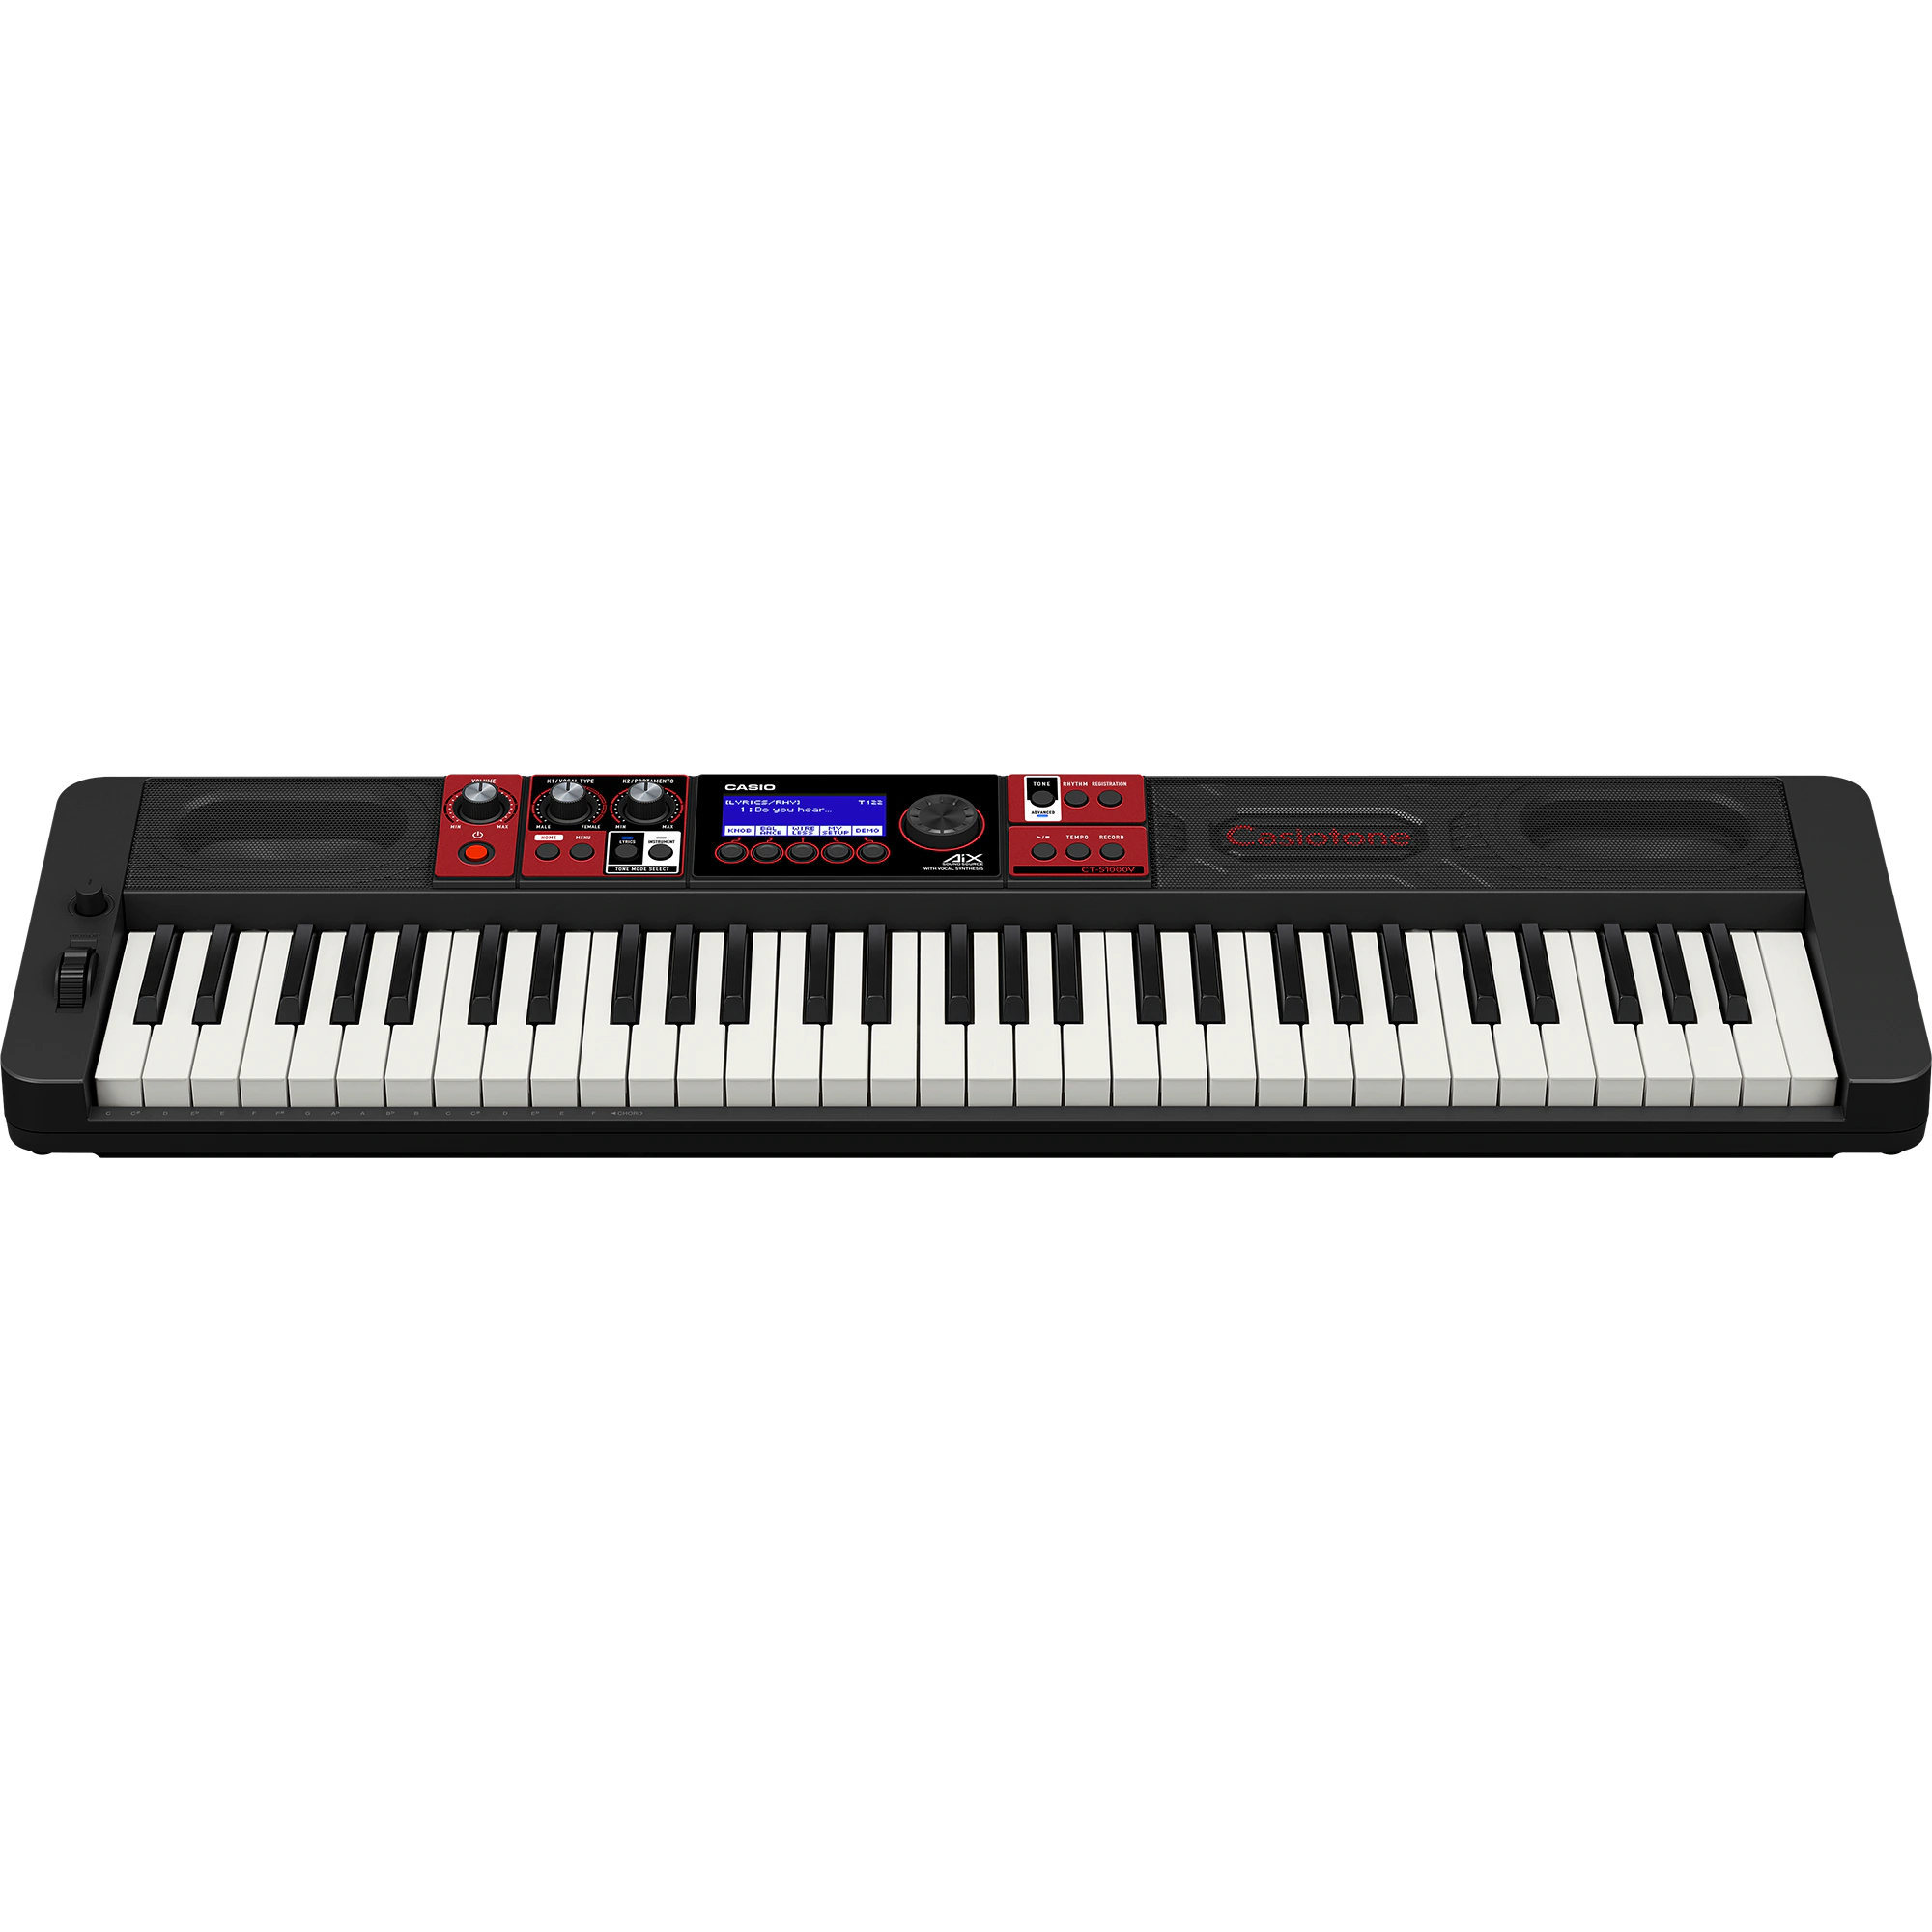 Casio Casiotone CT-S1000V Portable 61-Key Arranger Keyboard with Vocal Synthesis